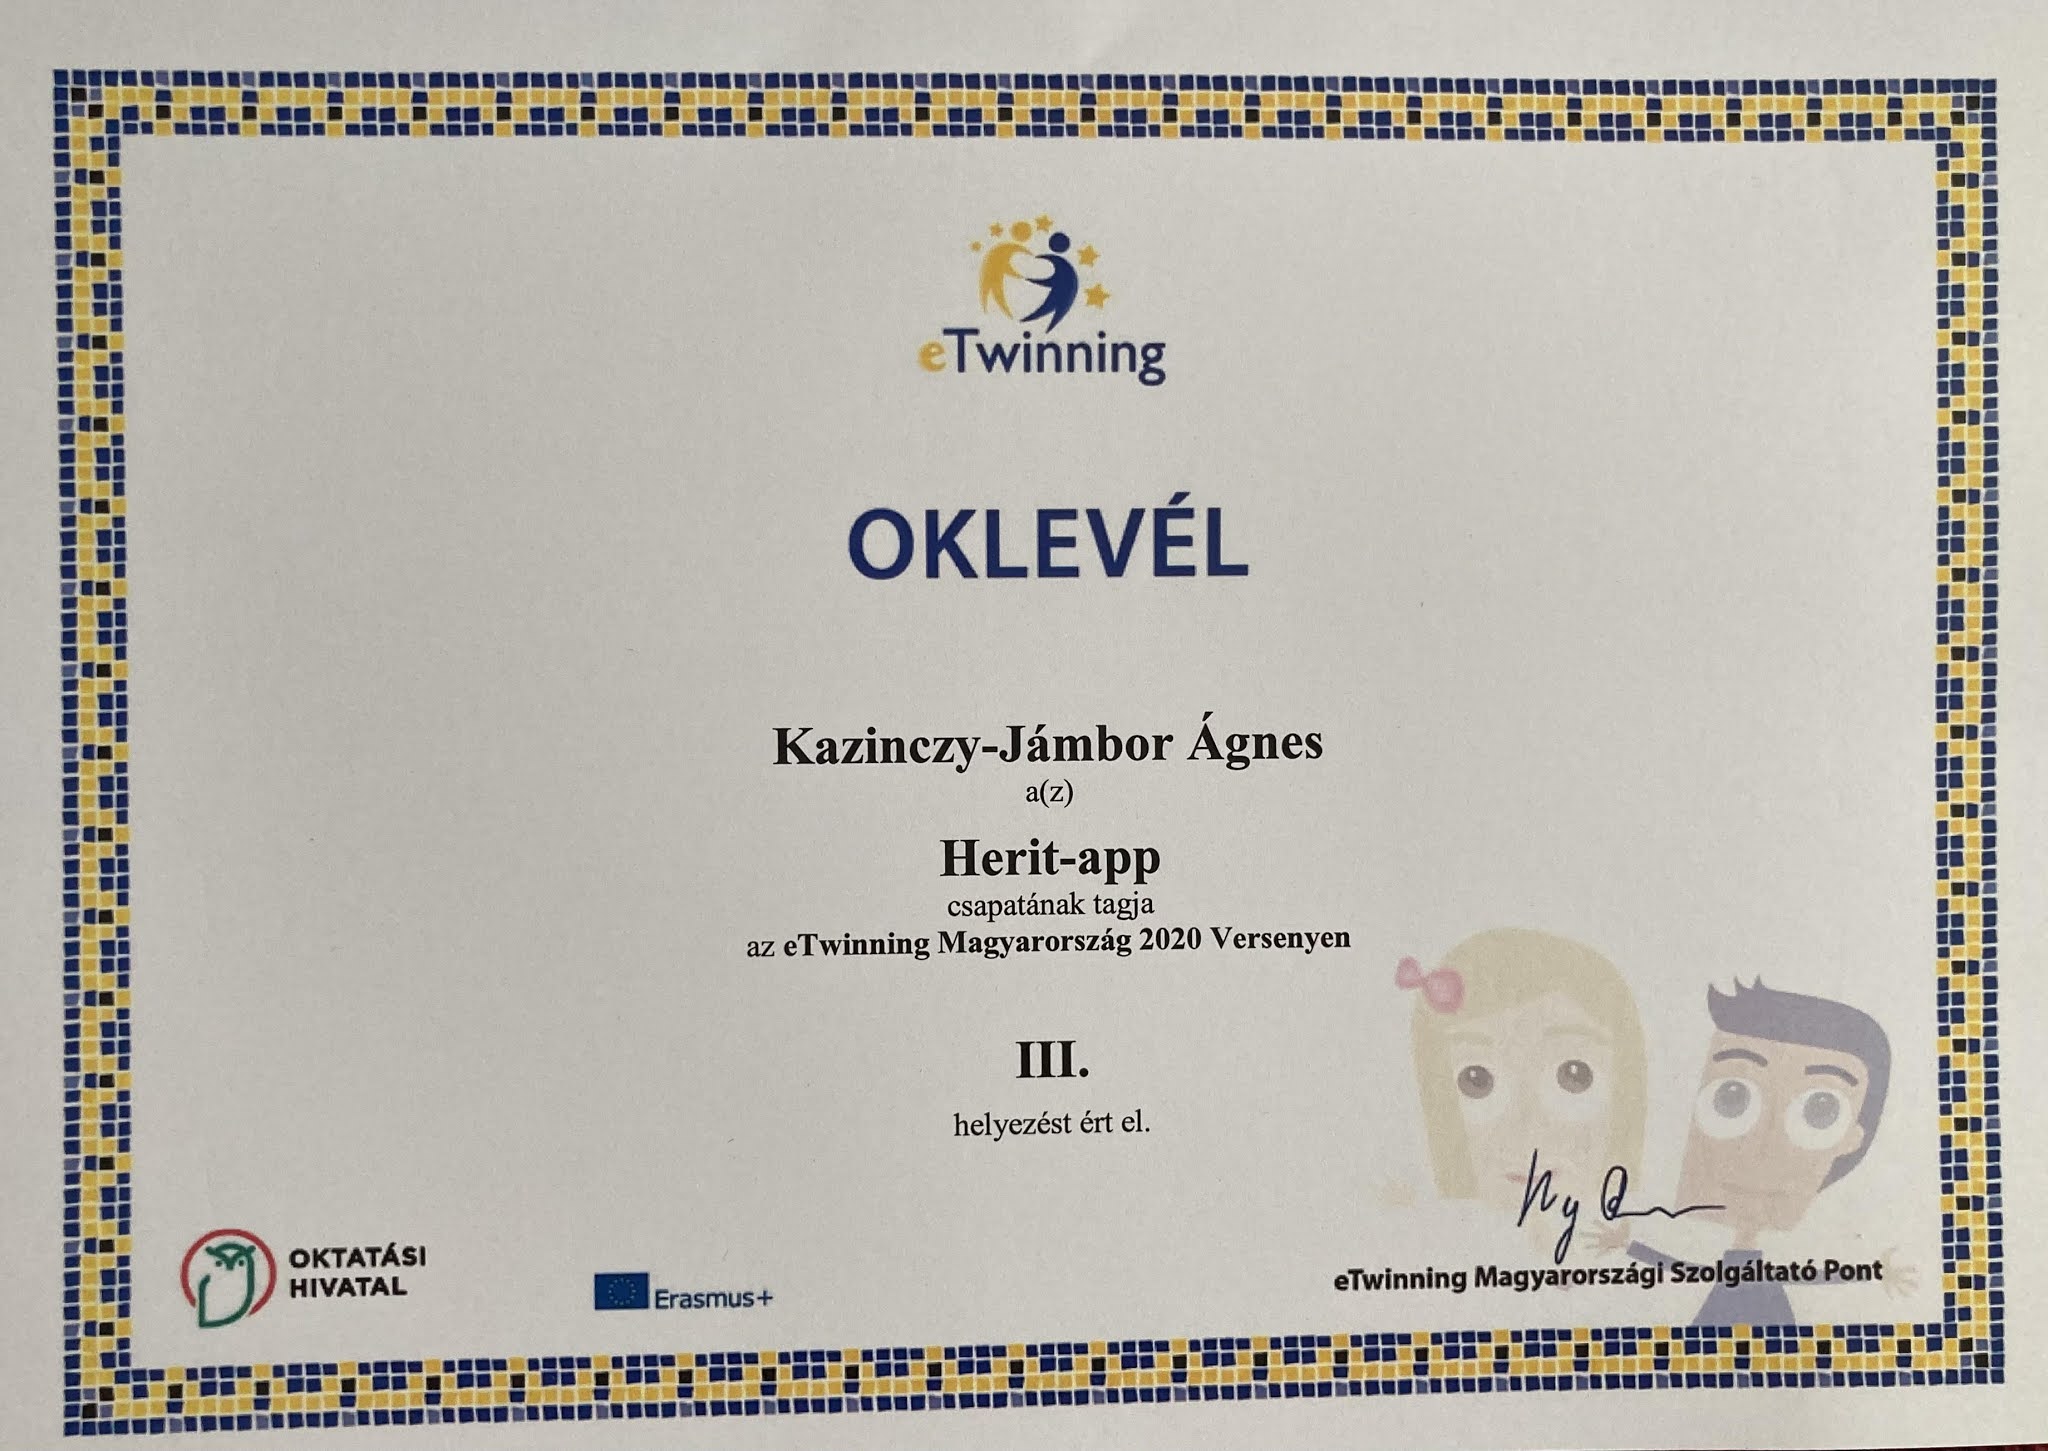 3rd place of the eTwinning competition in Hungary 2020.